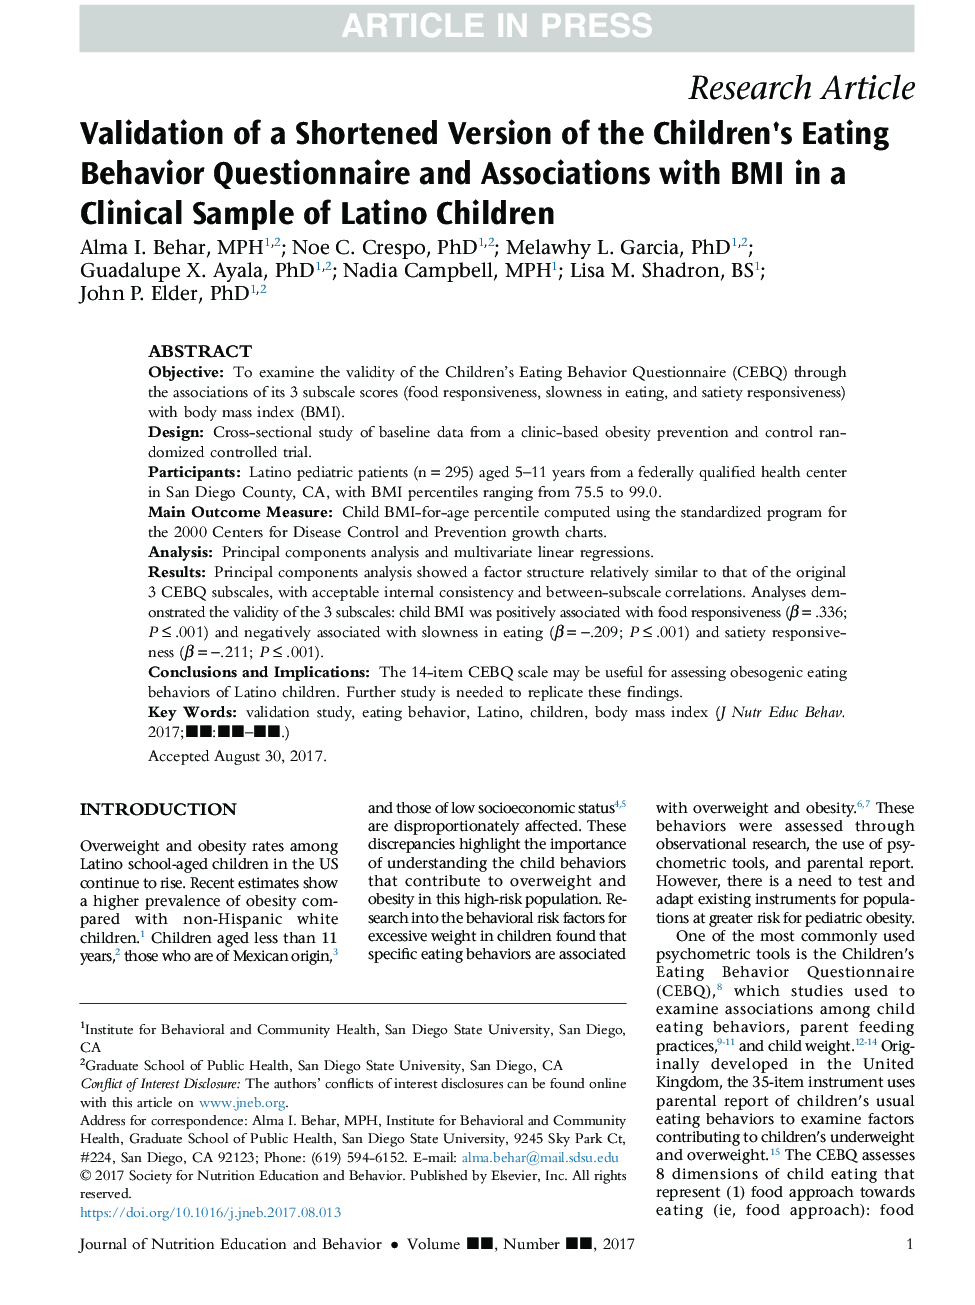 Validation of a Shortened Version of the Children's Eating Behavior Questionnaire and Associations with BMI in a Clinical Sample of Latino Children